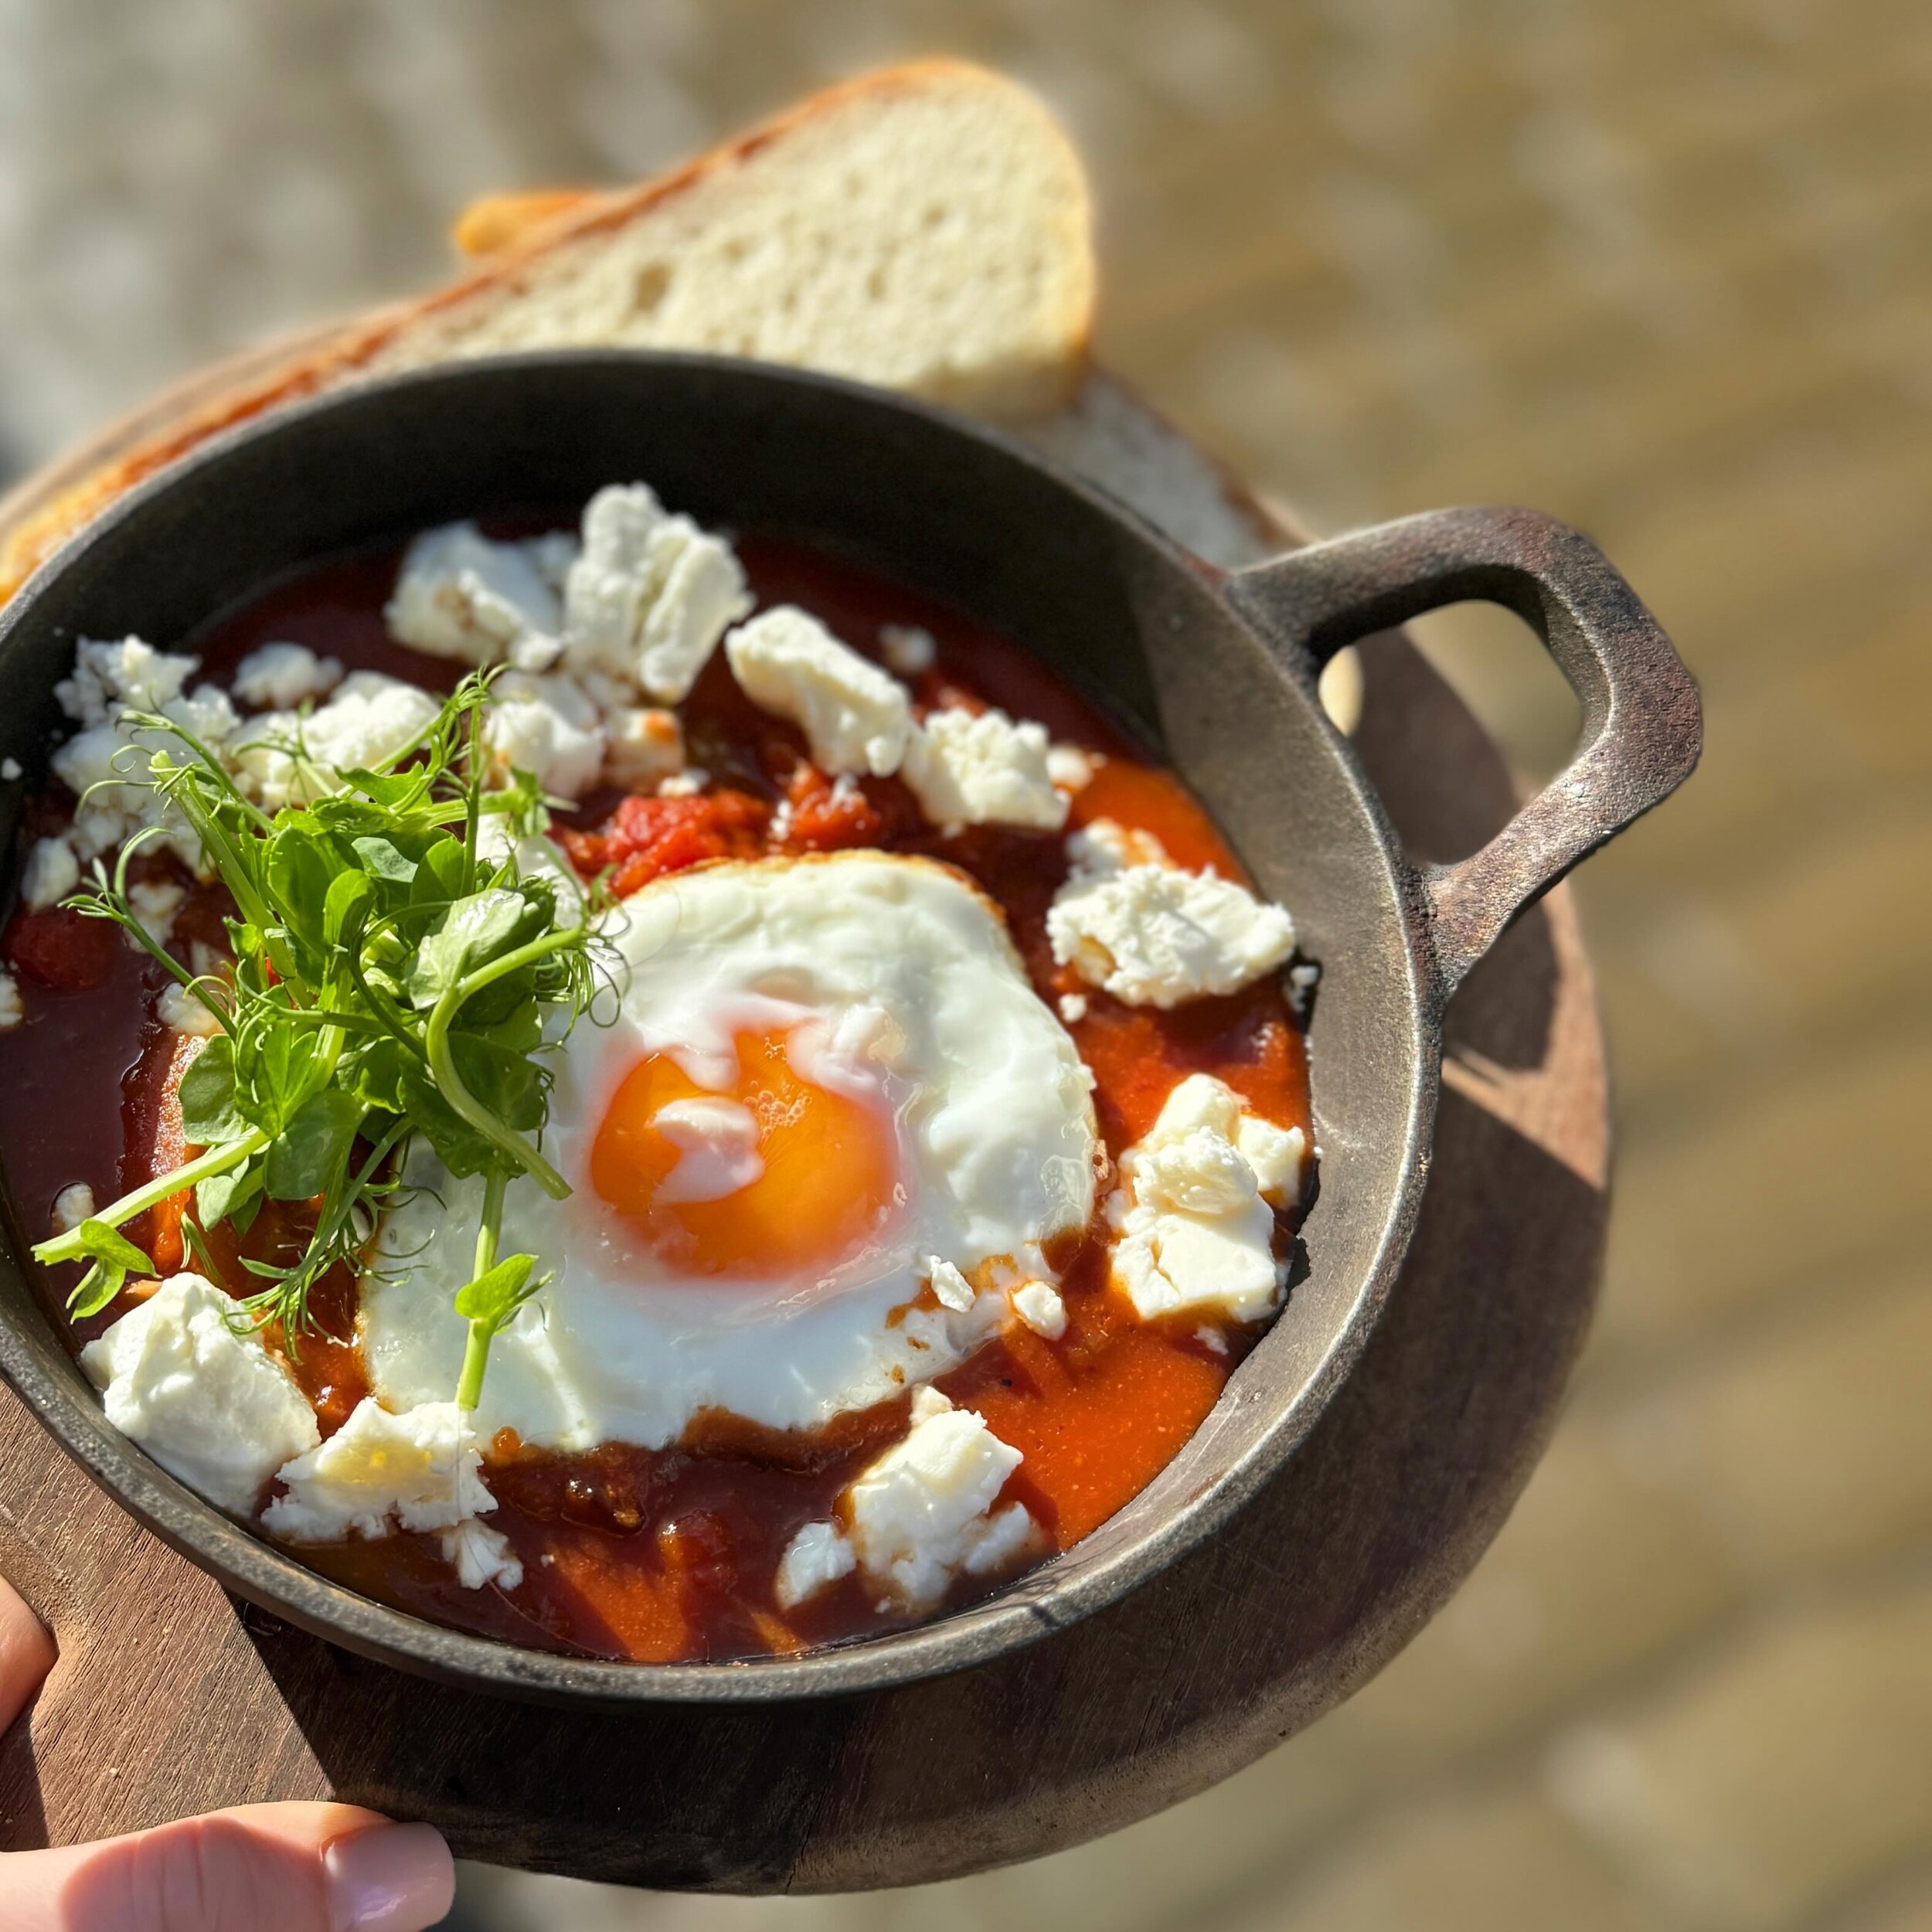 Mornings are made better with a hearty breakfast and good company. 🍳❤️ 

📸 Shakshuka ~Tomato &amp; peppers cooked in cumin, coriander &amp; paprika sauce, topped with feta &amp; a fried egg. Serve in a skillet with toasted sourdough. 

If you&rsquo